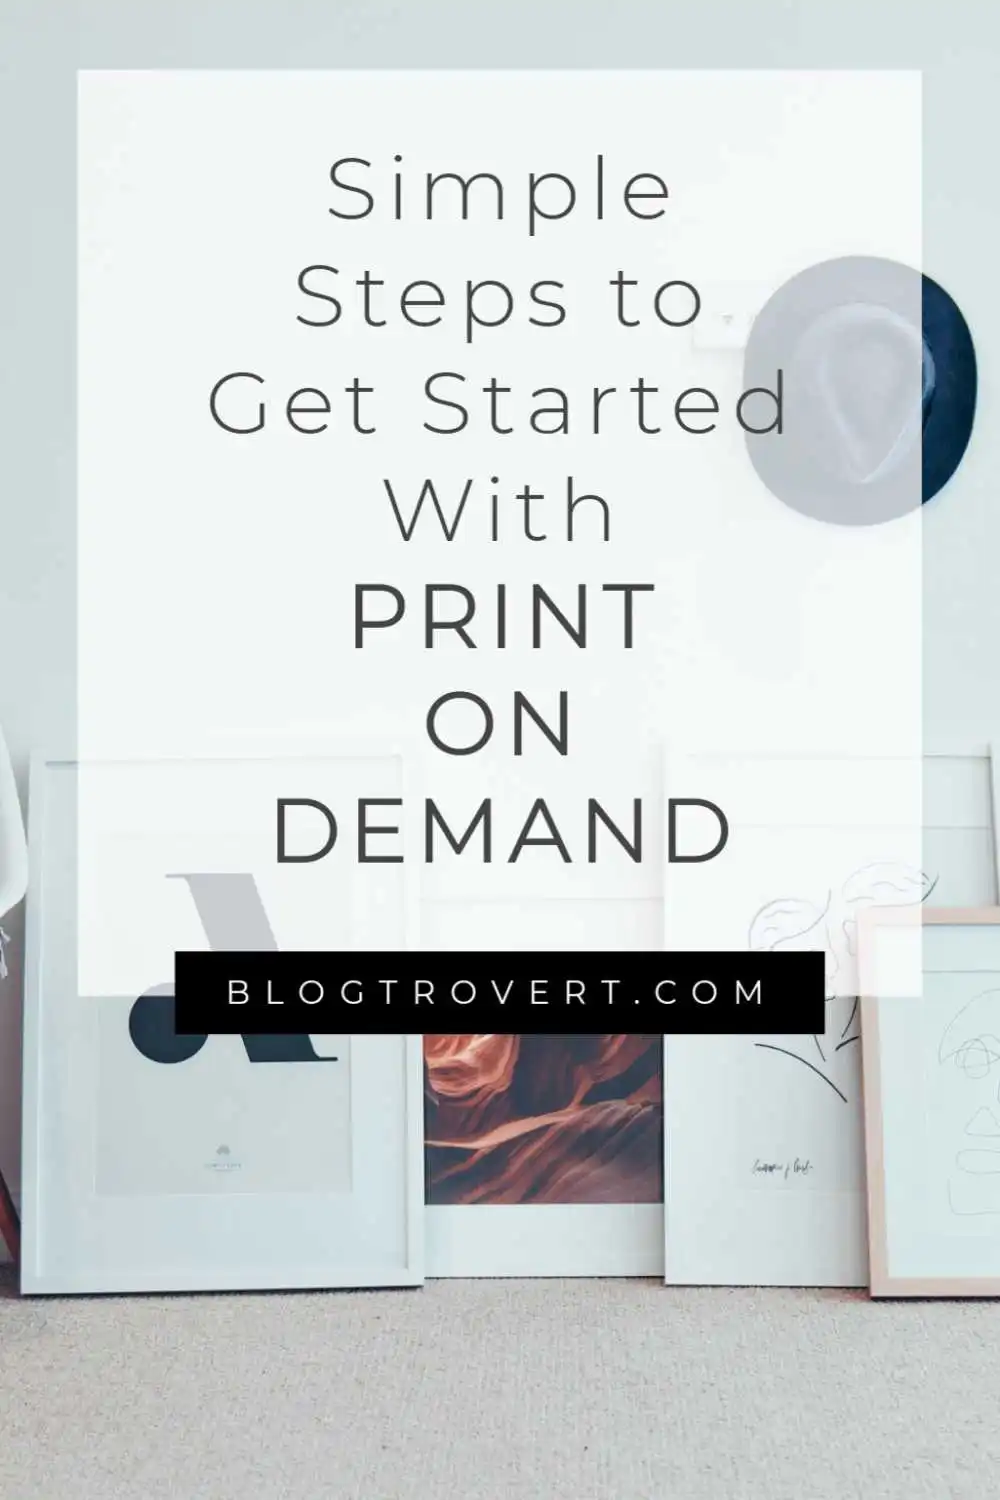 How To Start A Print On Demand Business in 11 Easy Steps 2